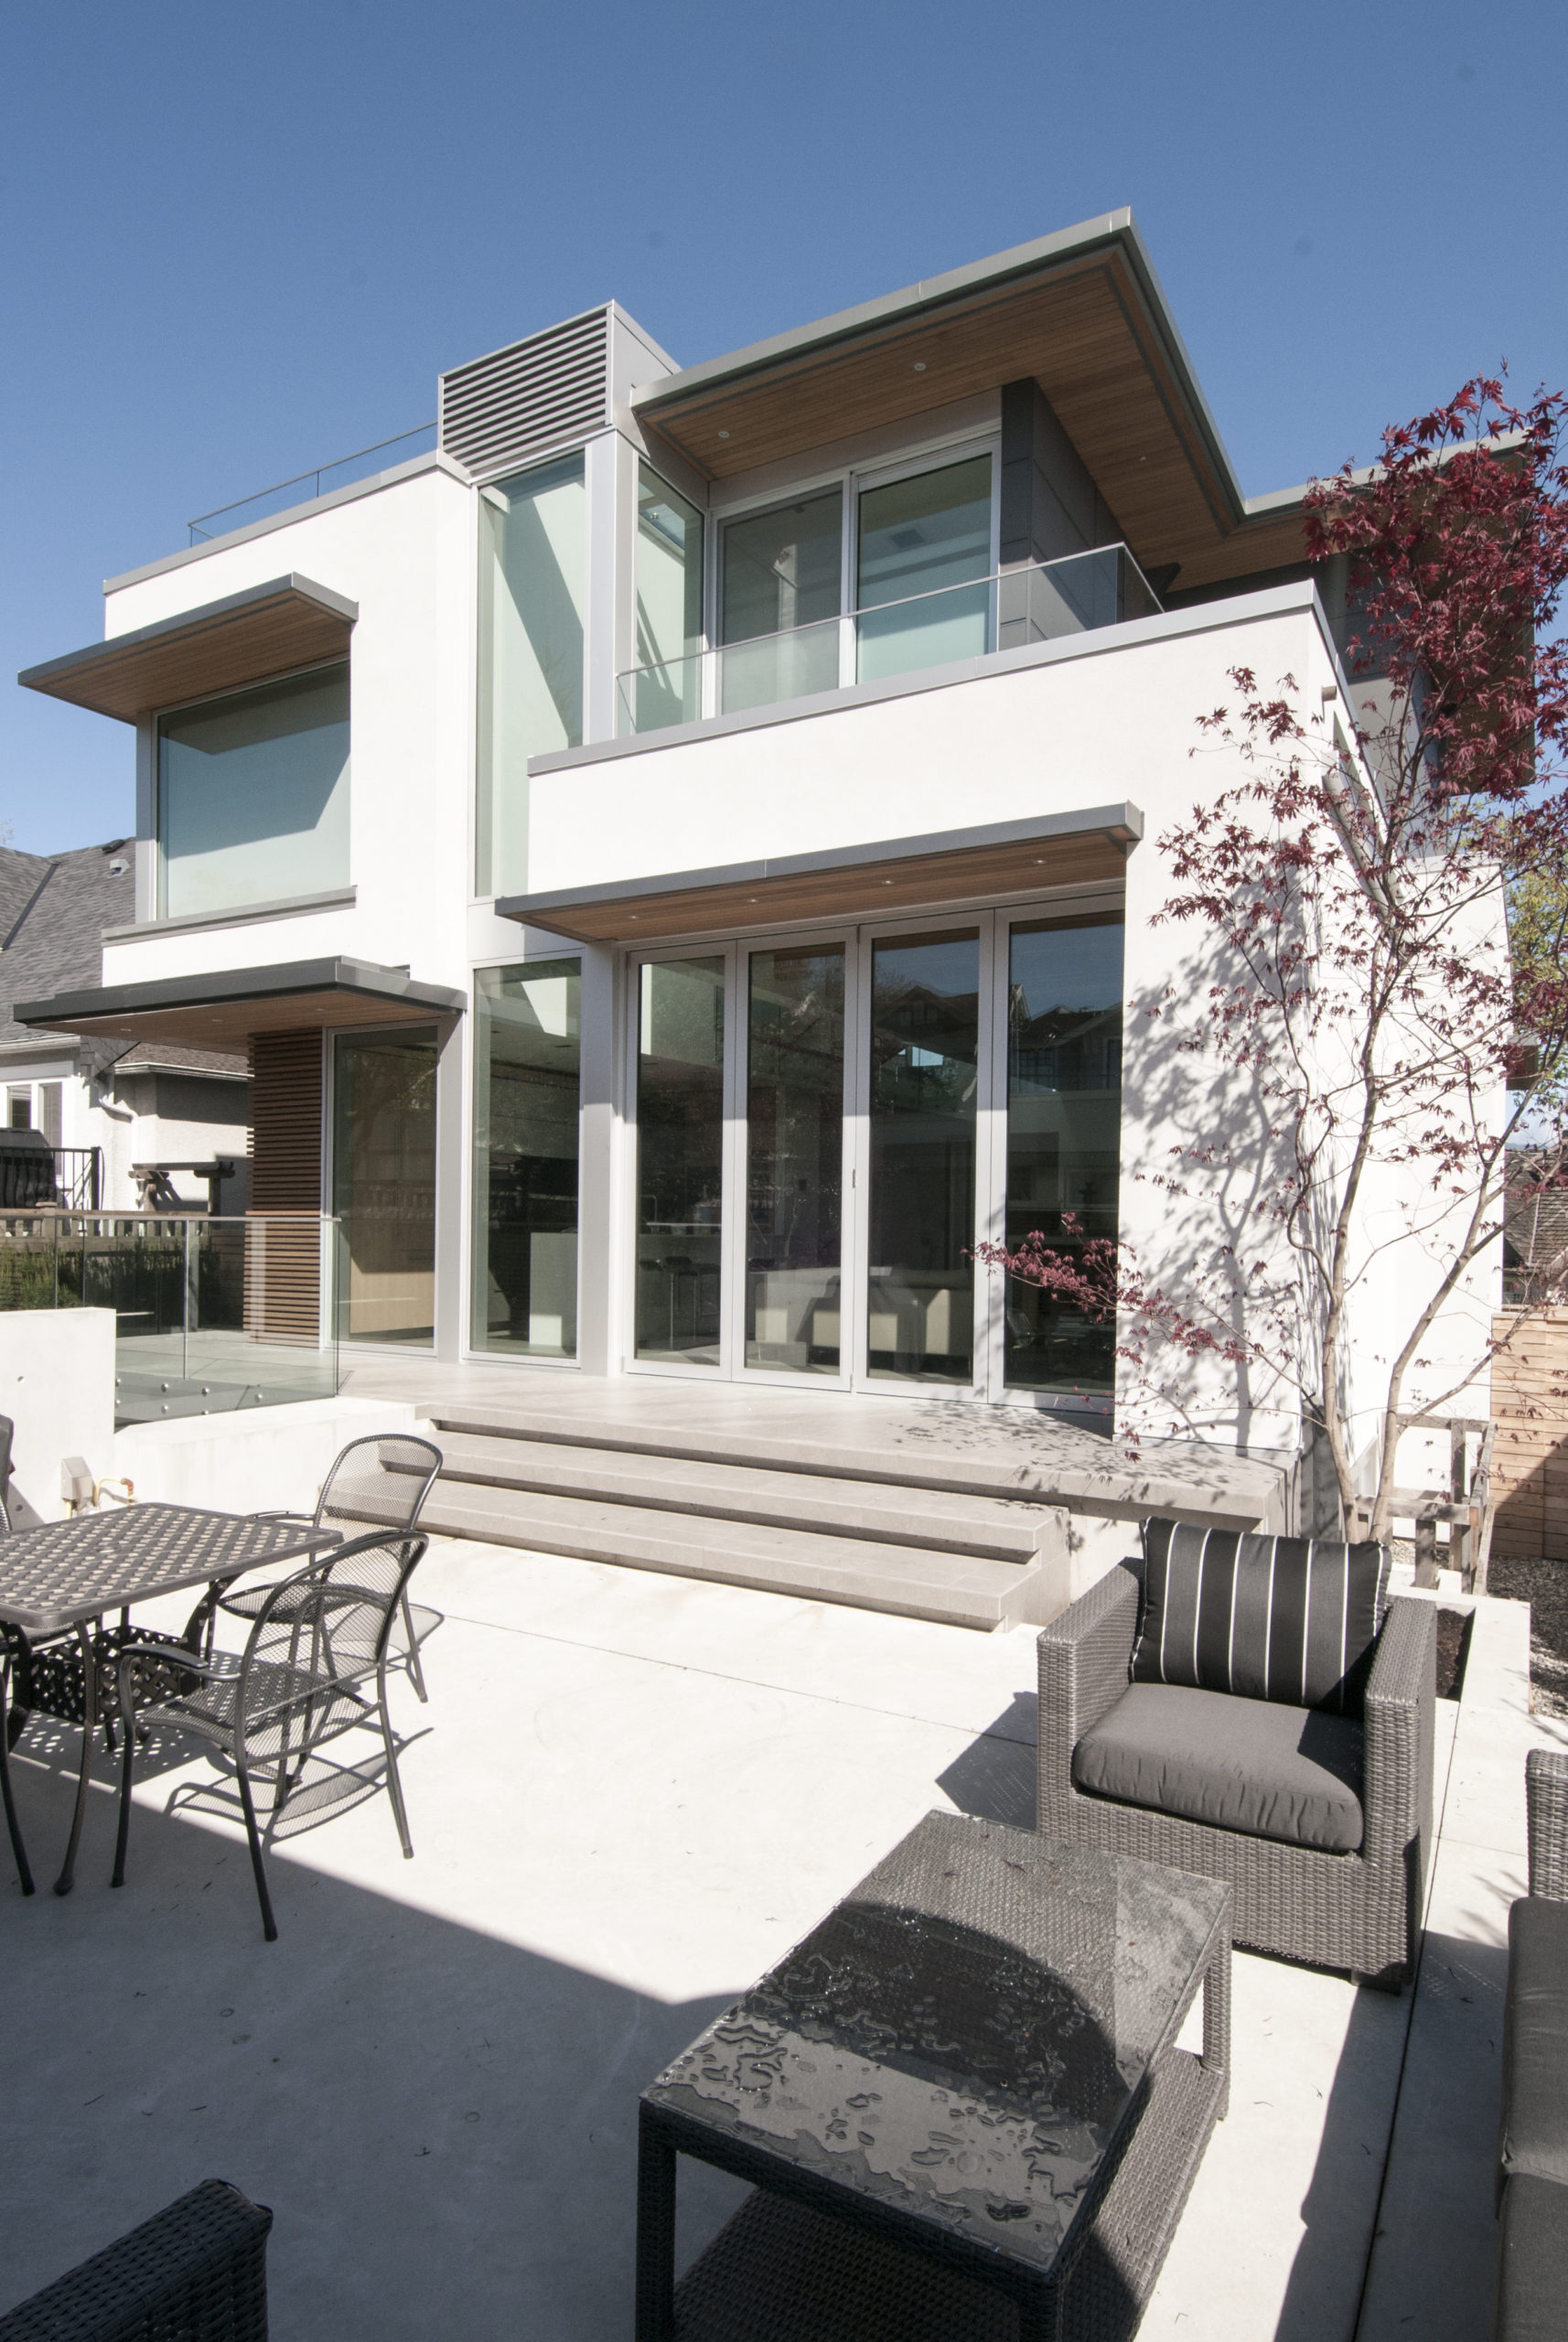 Spacious backyard with a minimalist design at a Vancouver custom home.